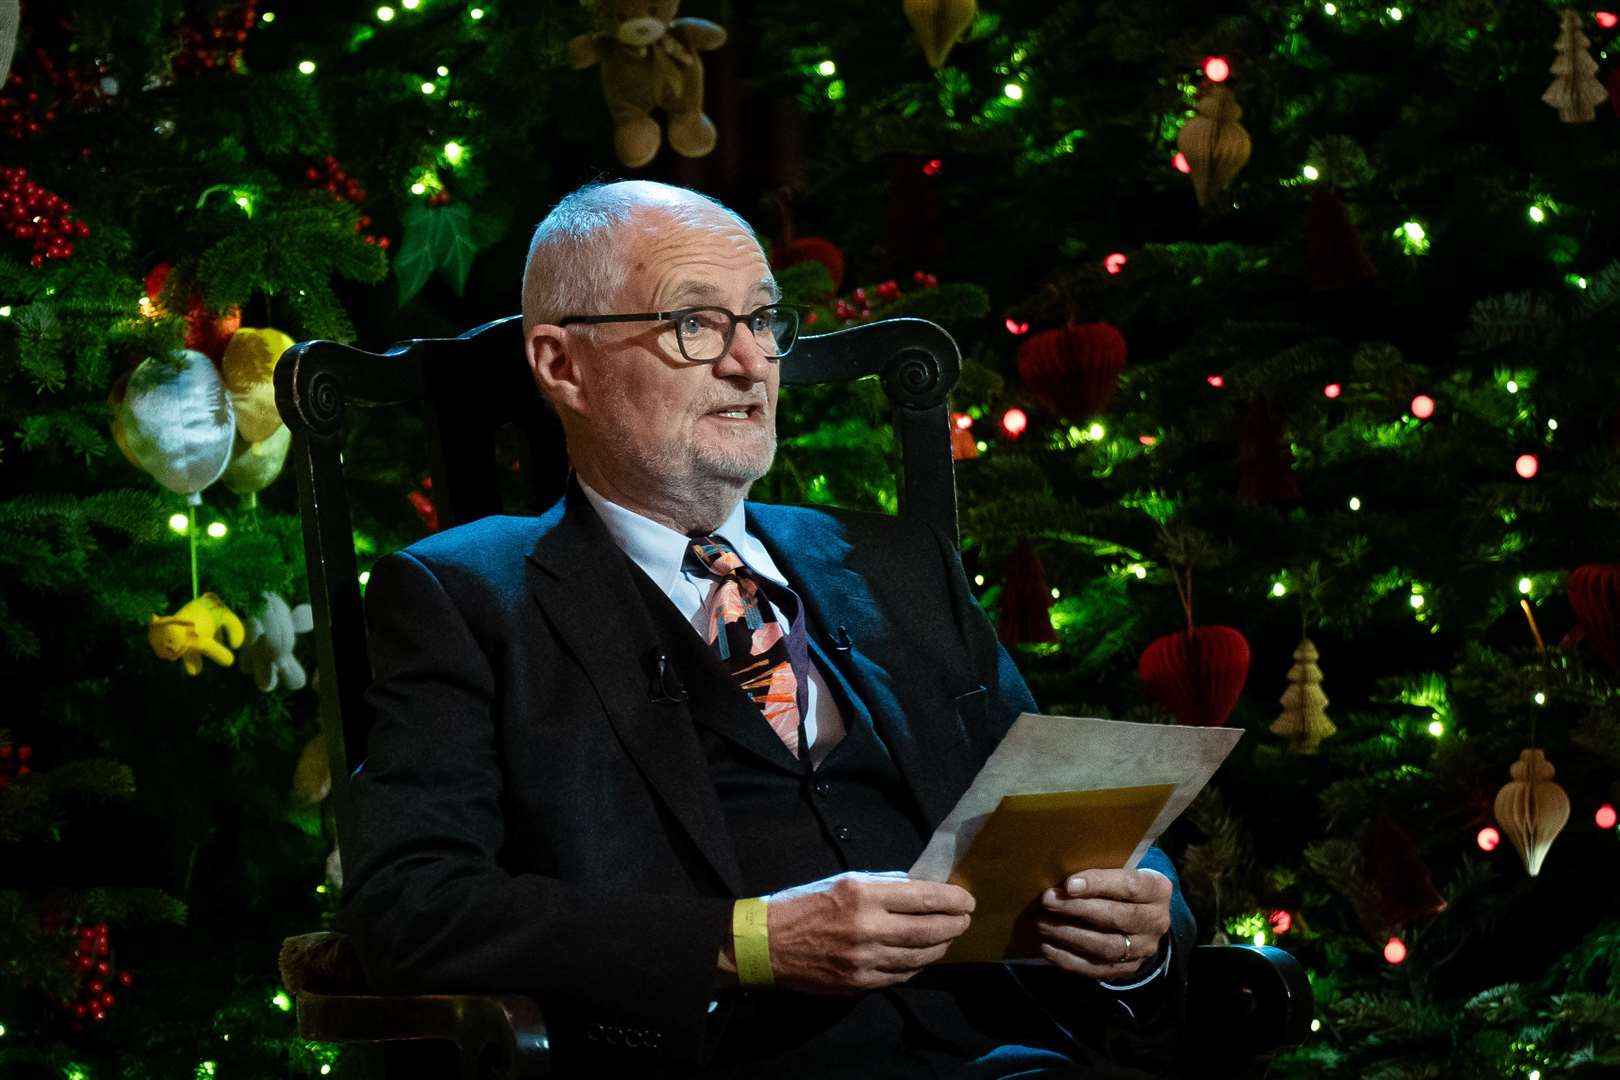 Jim Broadbent read an extract from Letters from Father Christmas by JRR Tolkien during the concert (Aaron Chown/PA)